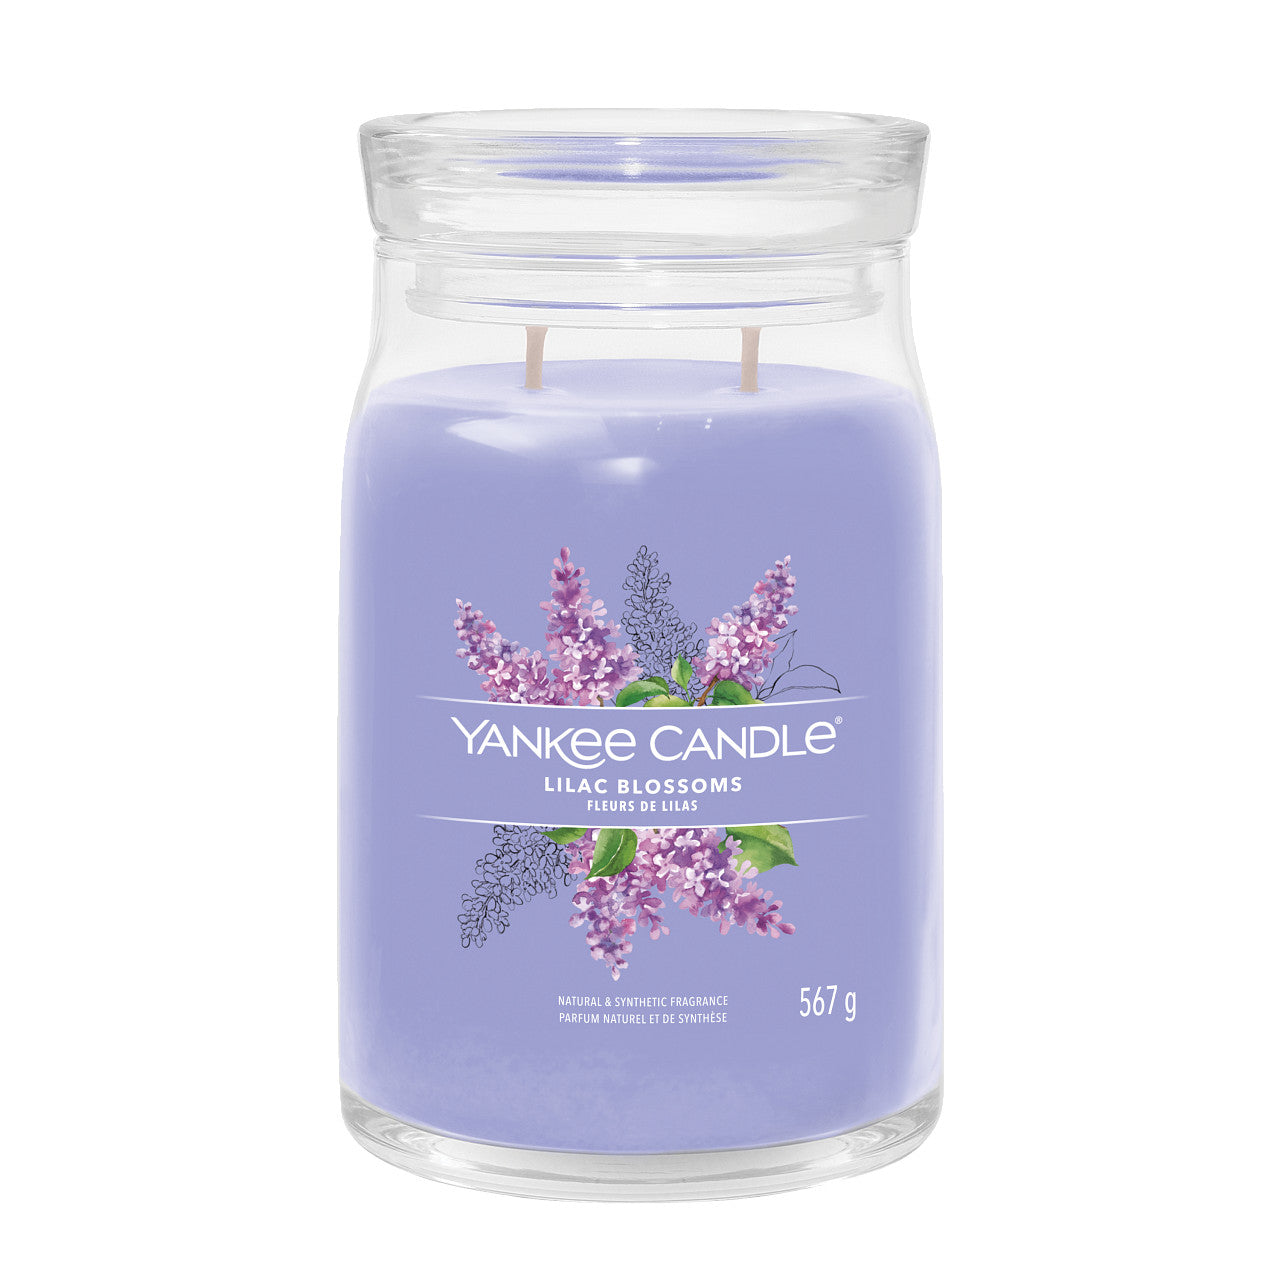 Lilac Blossoms - Signature Large Jar Scented Candle